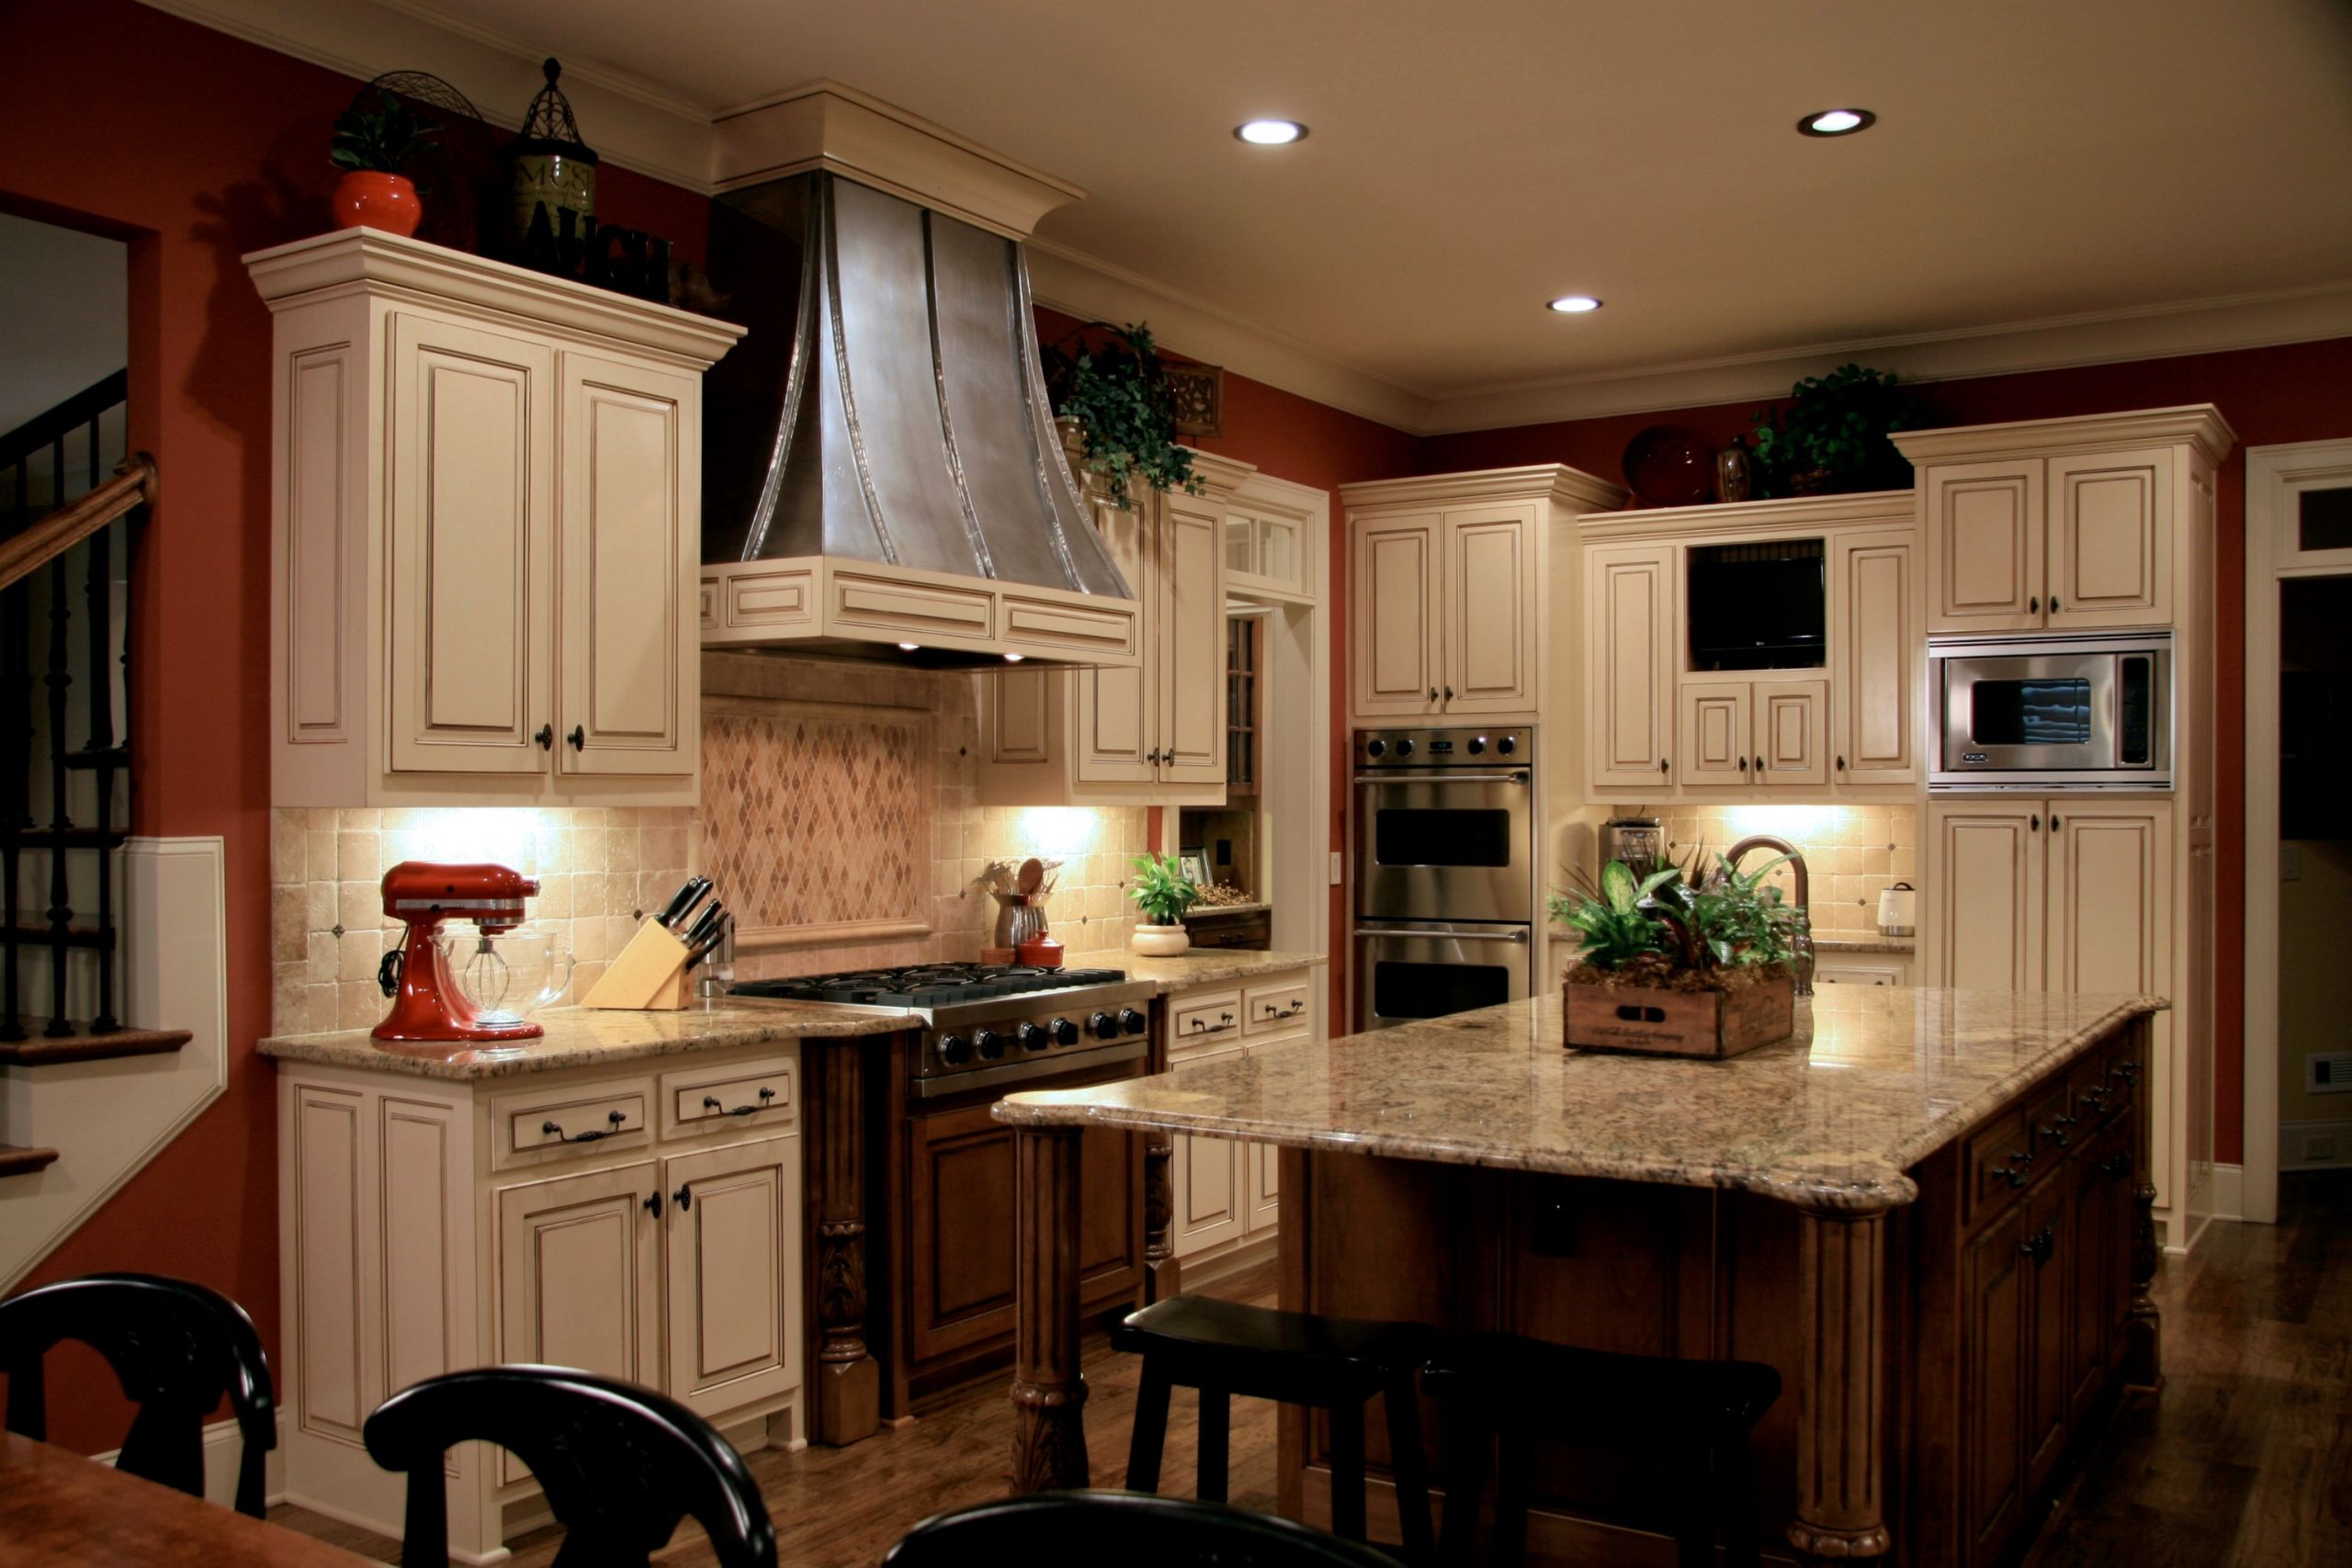 Recessed Lighting Kitchens
 Install recessed lighting in a kitchen